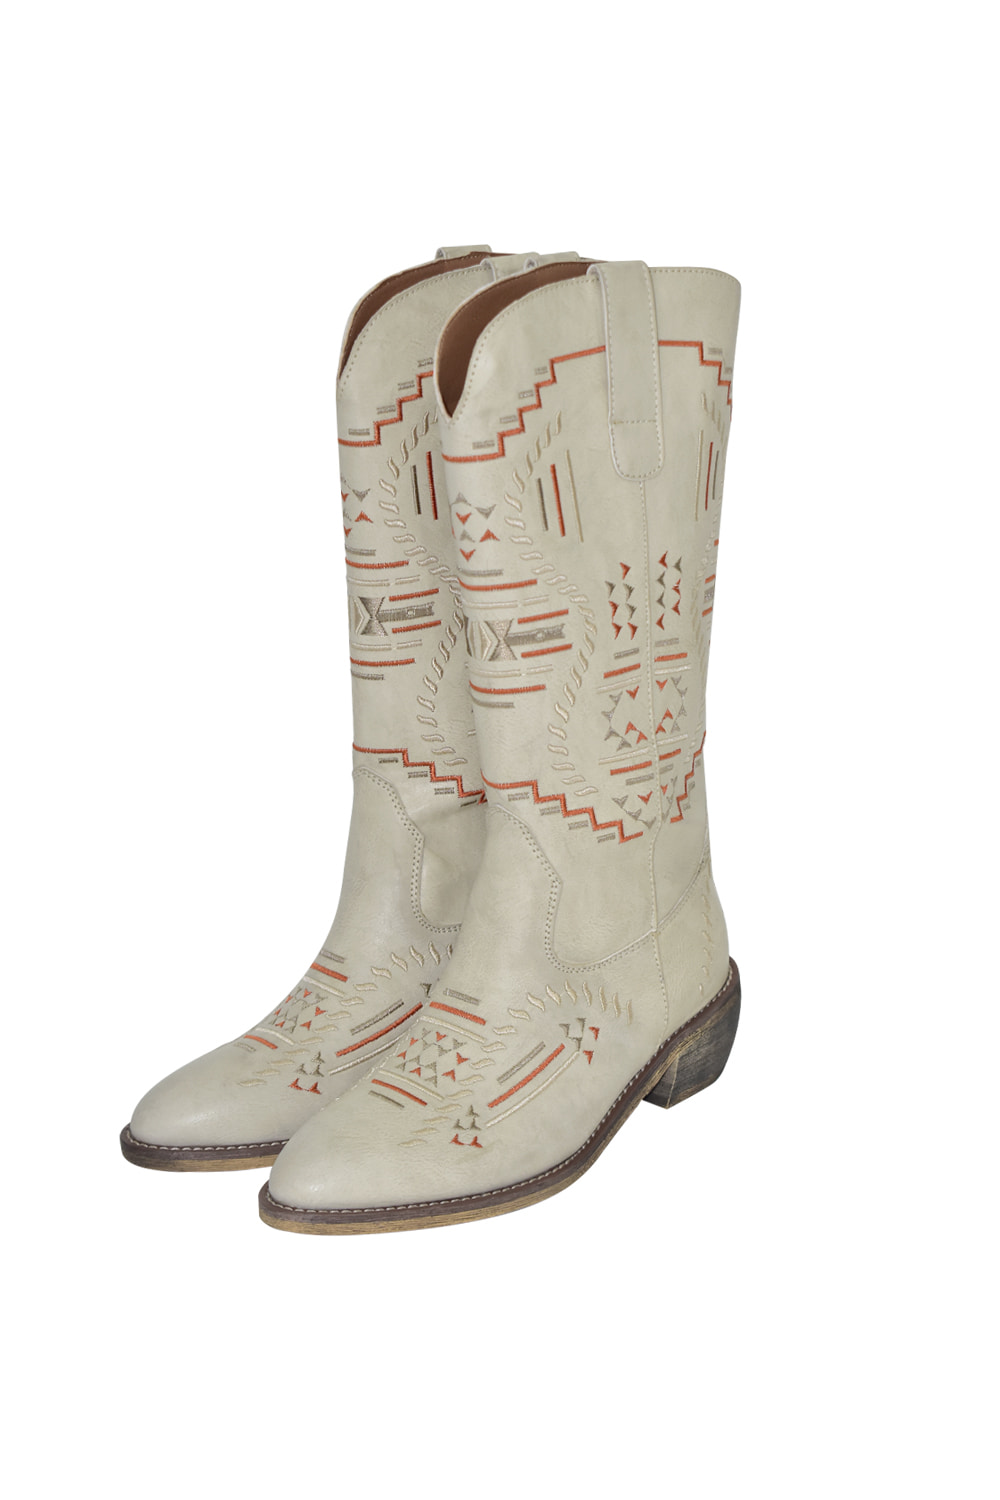 mov western boots (ivory)